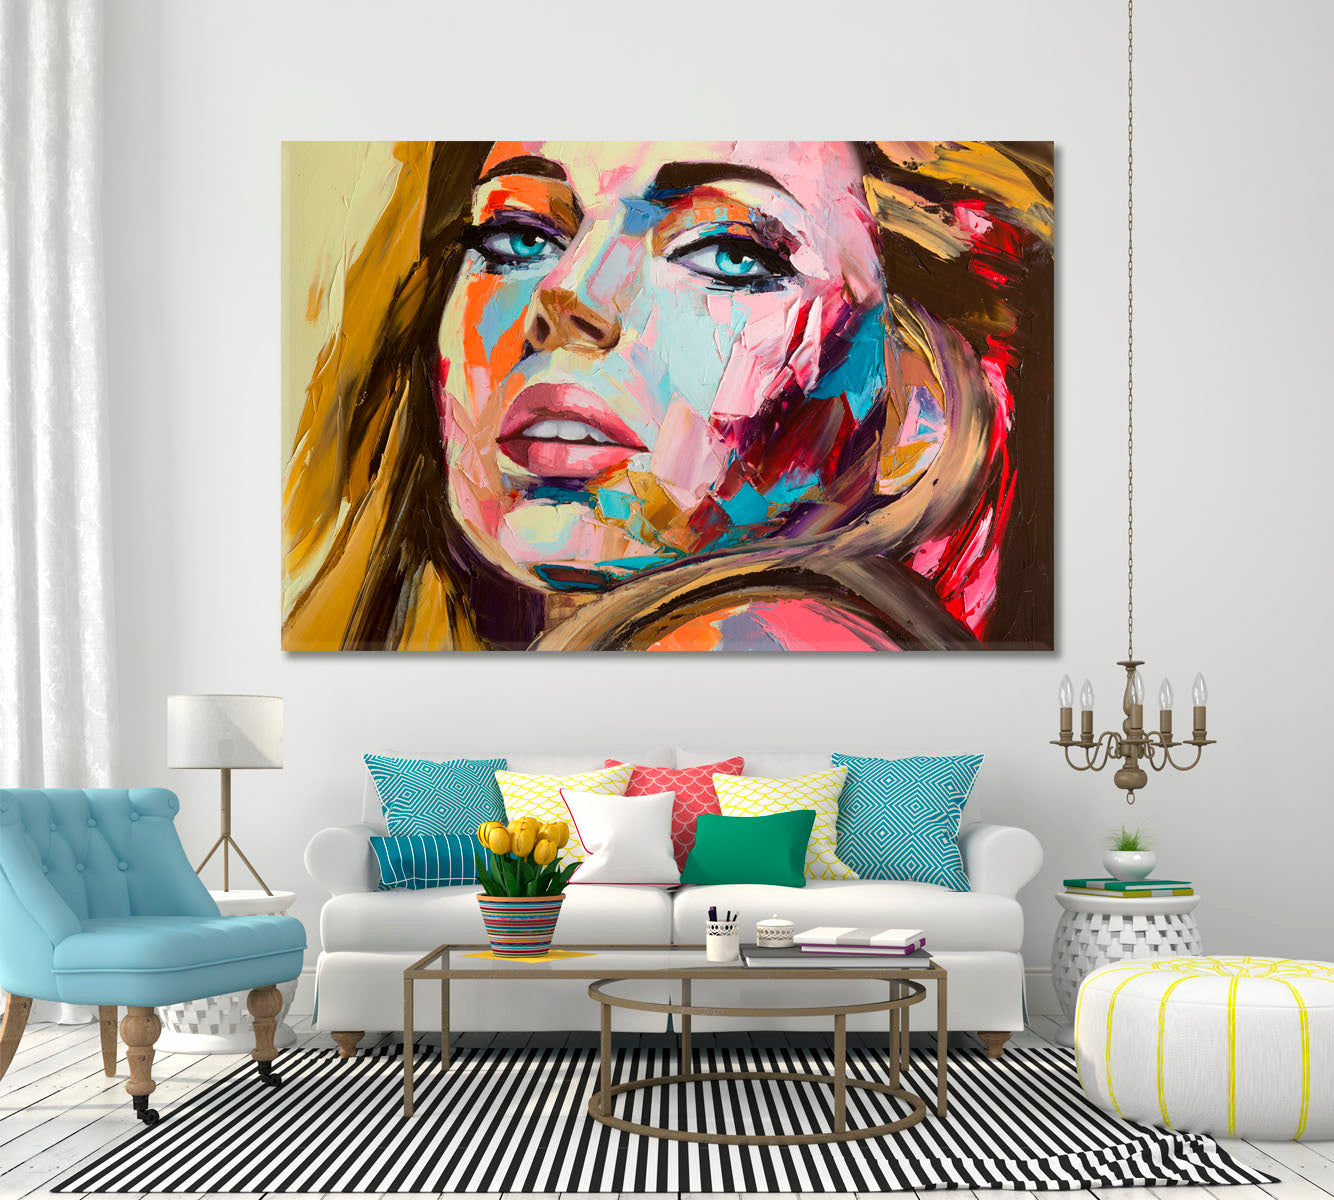 Colorful Emotions Fantasy Woman Portrait Expressionism Contemporary Art Artesty 1 panel 24" x 16" 